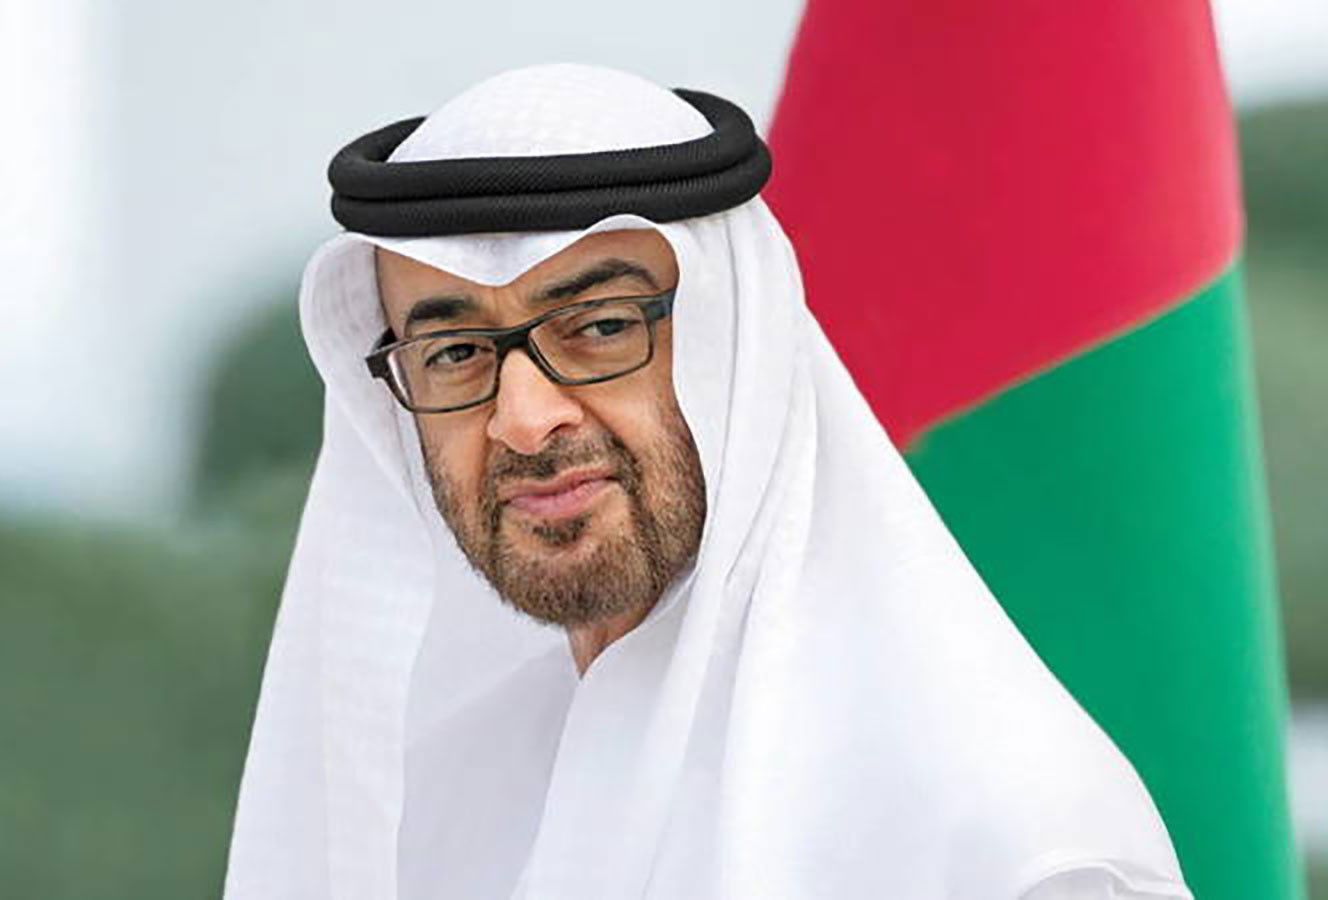 UAE President restructures social welfare programme of low-income citizens